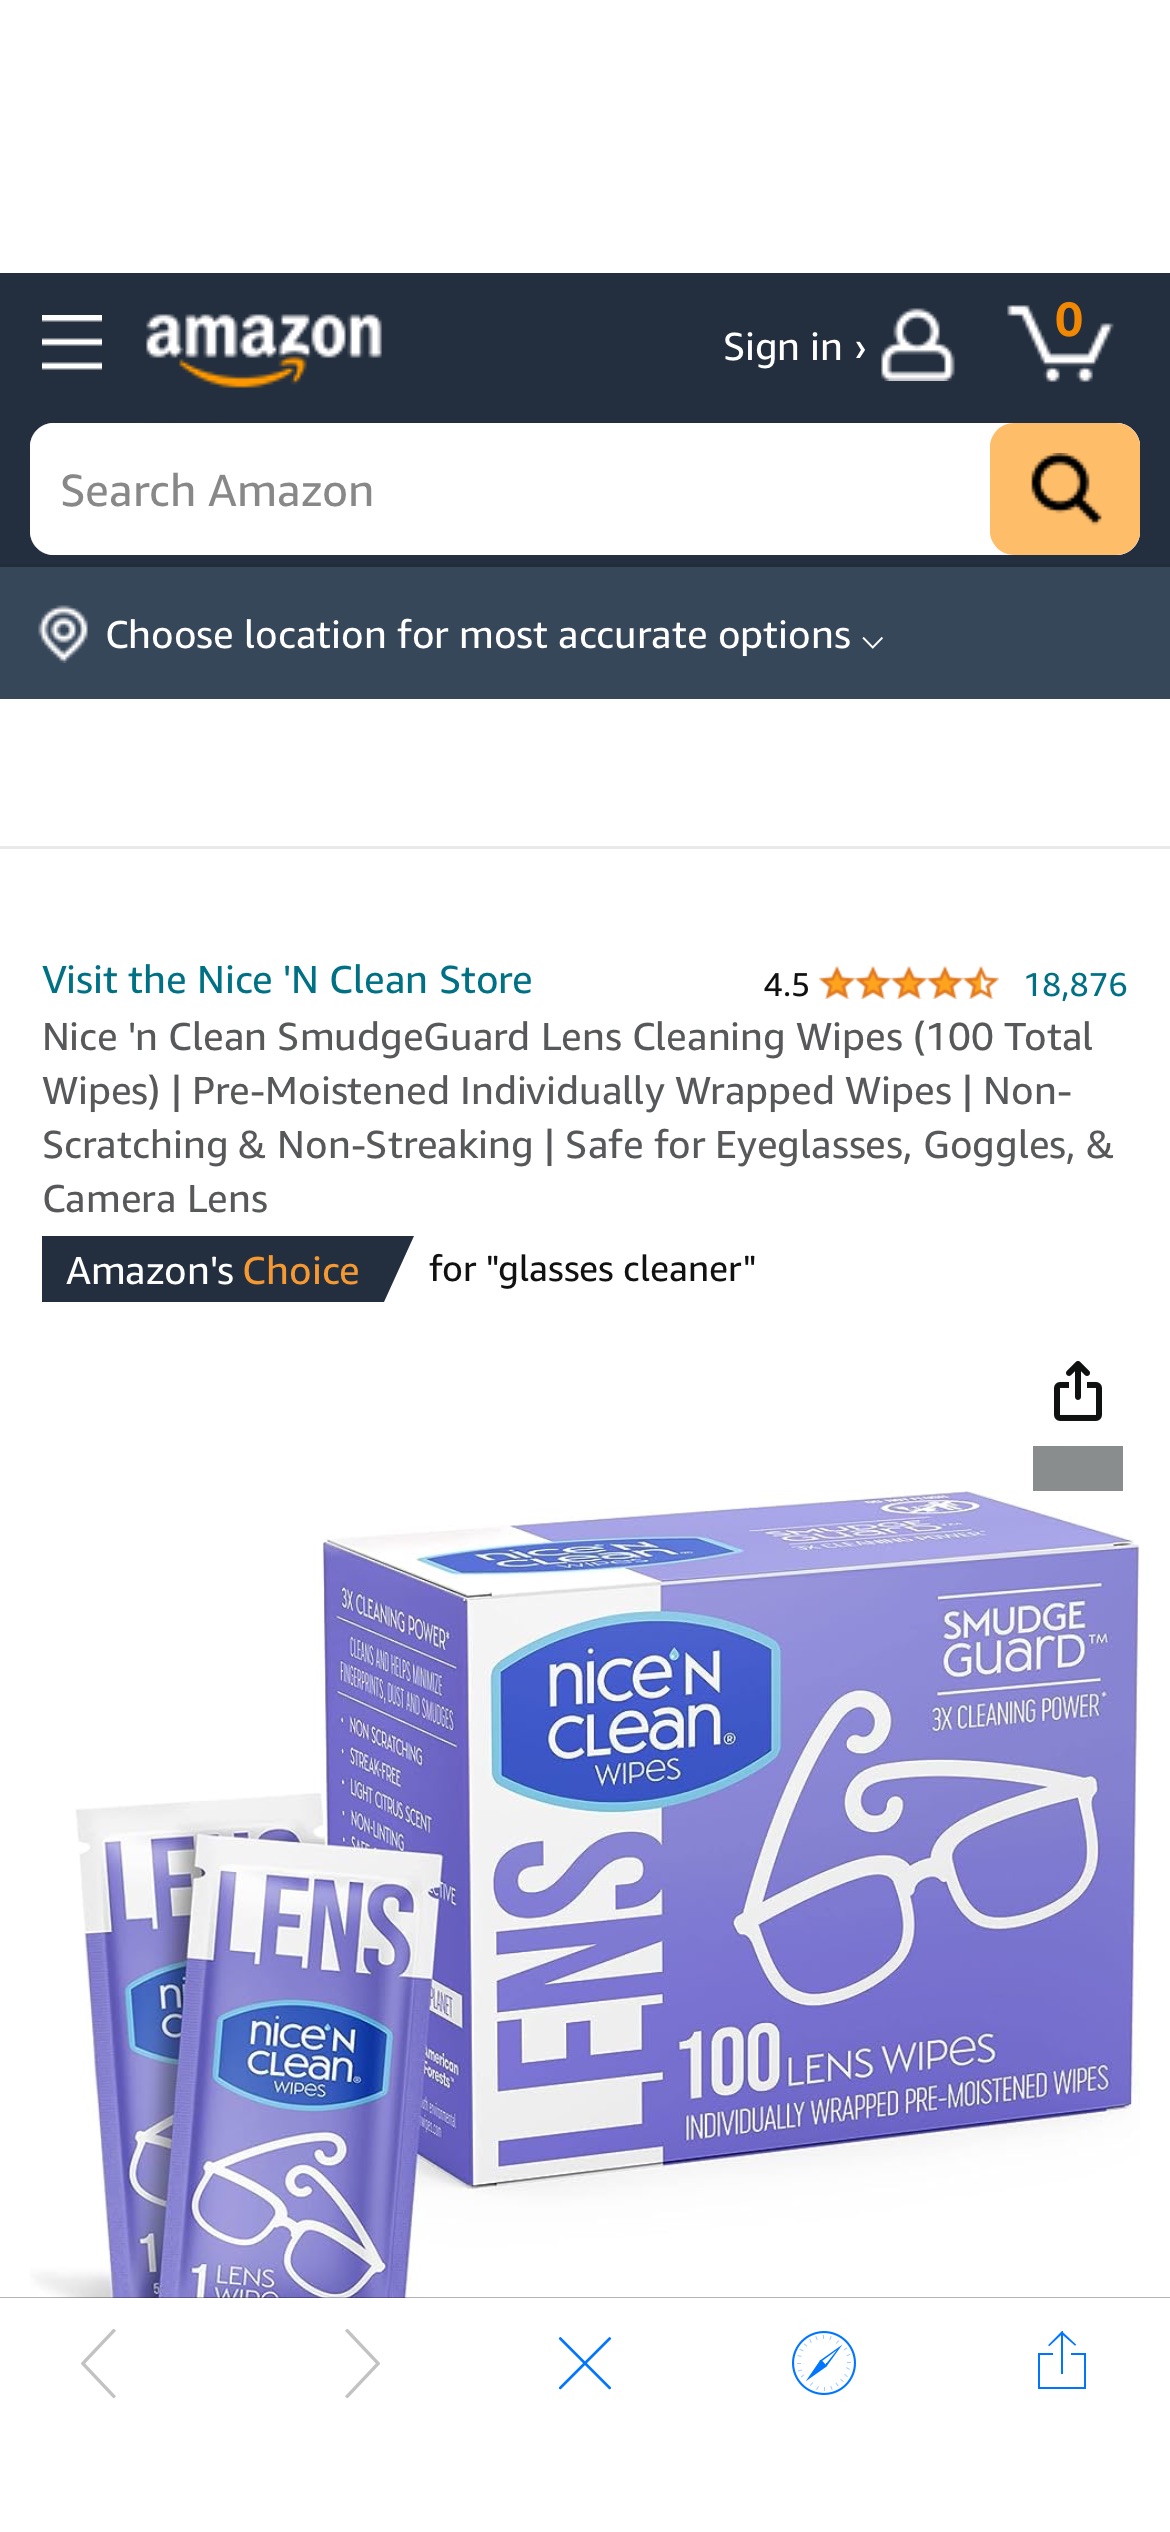 Amazon.com: Nice 'n Clean SmudgeGuard Lens Cleaning Wipes (100 Total Wipes) | Pre-Moistened Individually Wrapped Wipes | Non-Scratching & Non-Streaking | Safe for Eyeglasses, Goggles, & Camera Lens : 